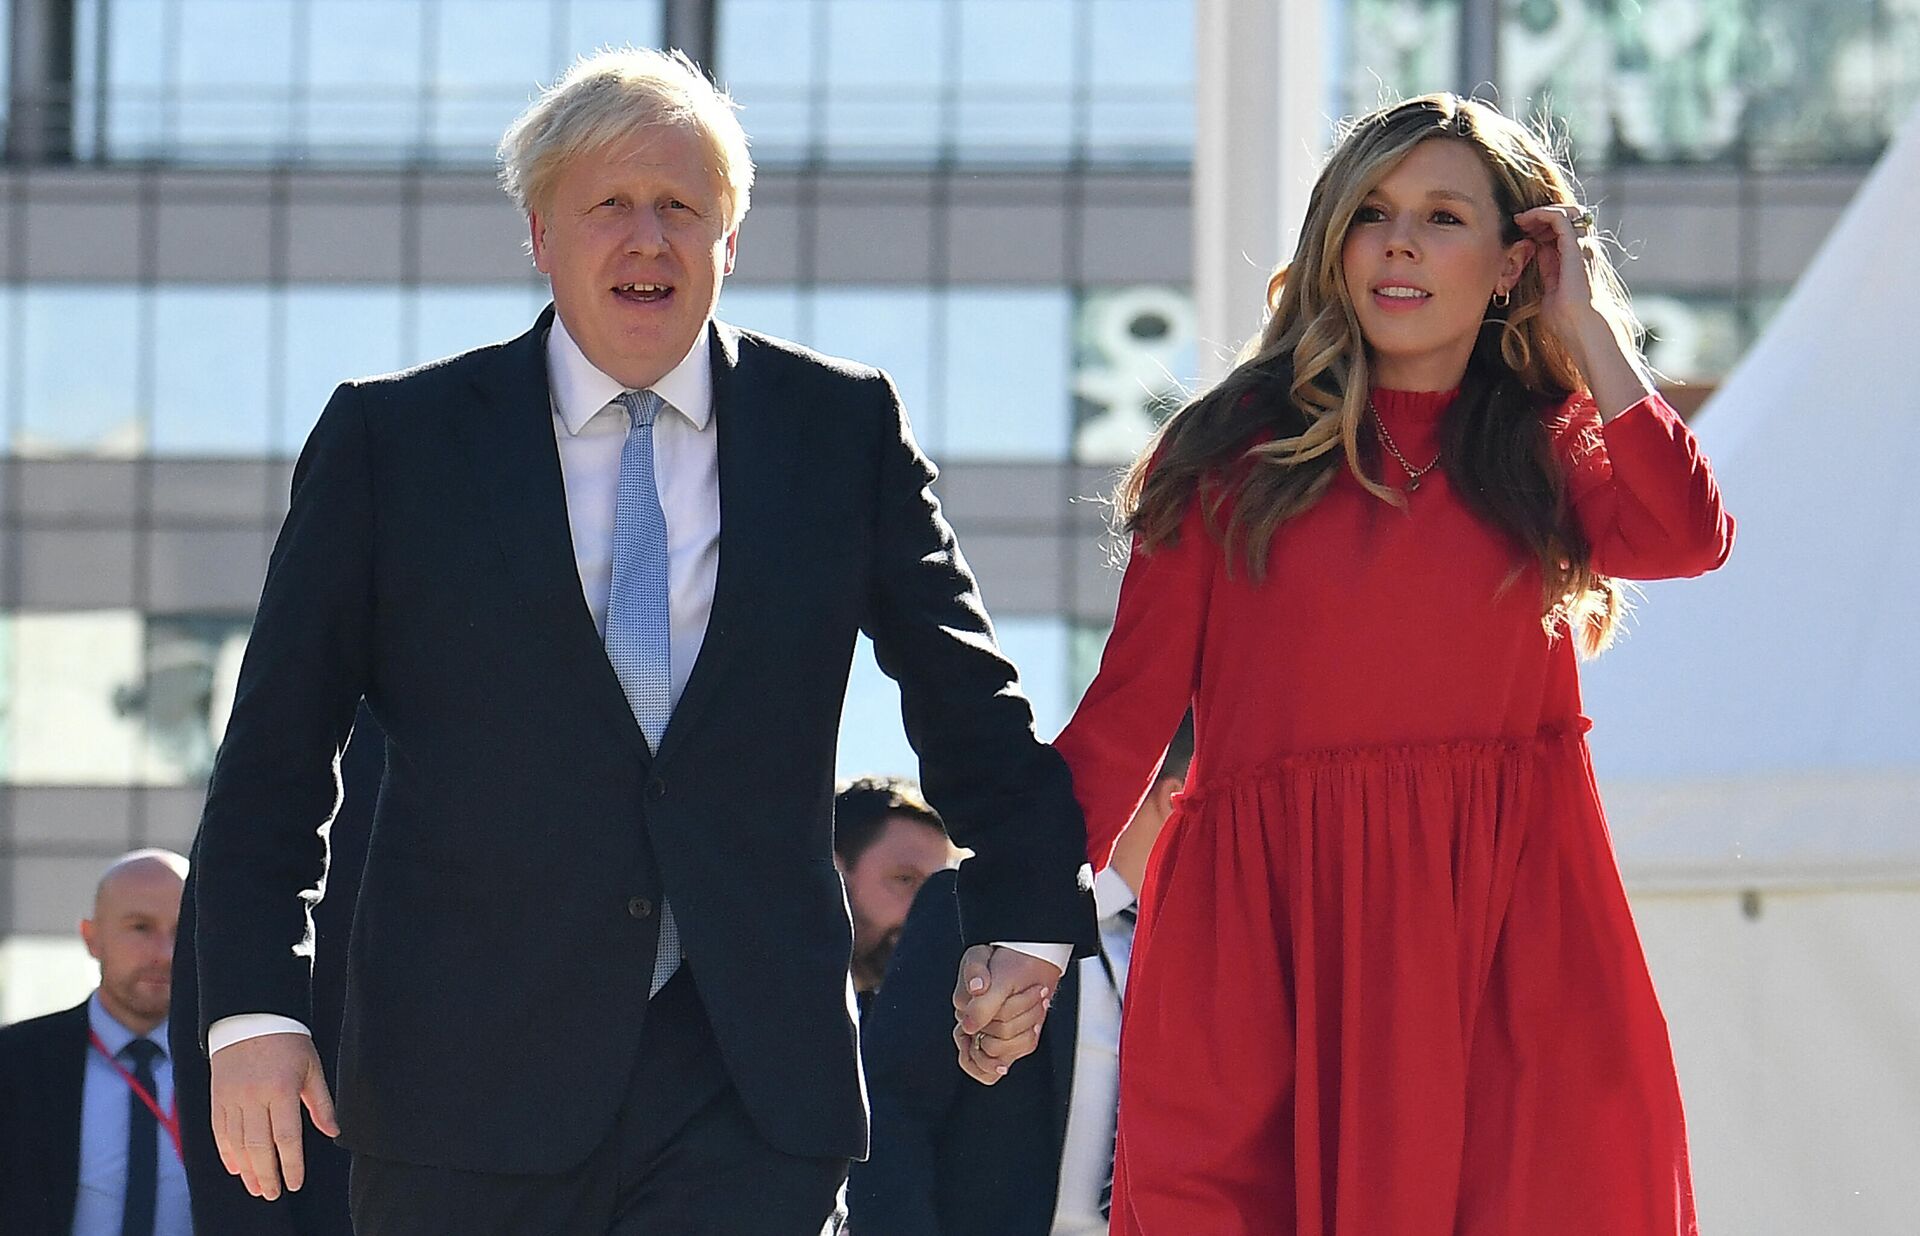 Britain's Prime Minister Boris Johnson (L) and his wife Carrie (R) arrive at the Manchester Central convention centre ahead of his keynote speech on the final day of the annual Conservative Party Conference in Manchester, northwest England, on October 6, 2021 - Sputnik International, 1920, 07.02.2022